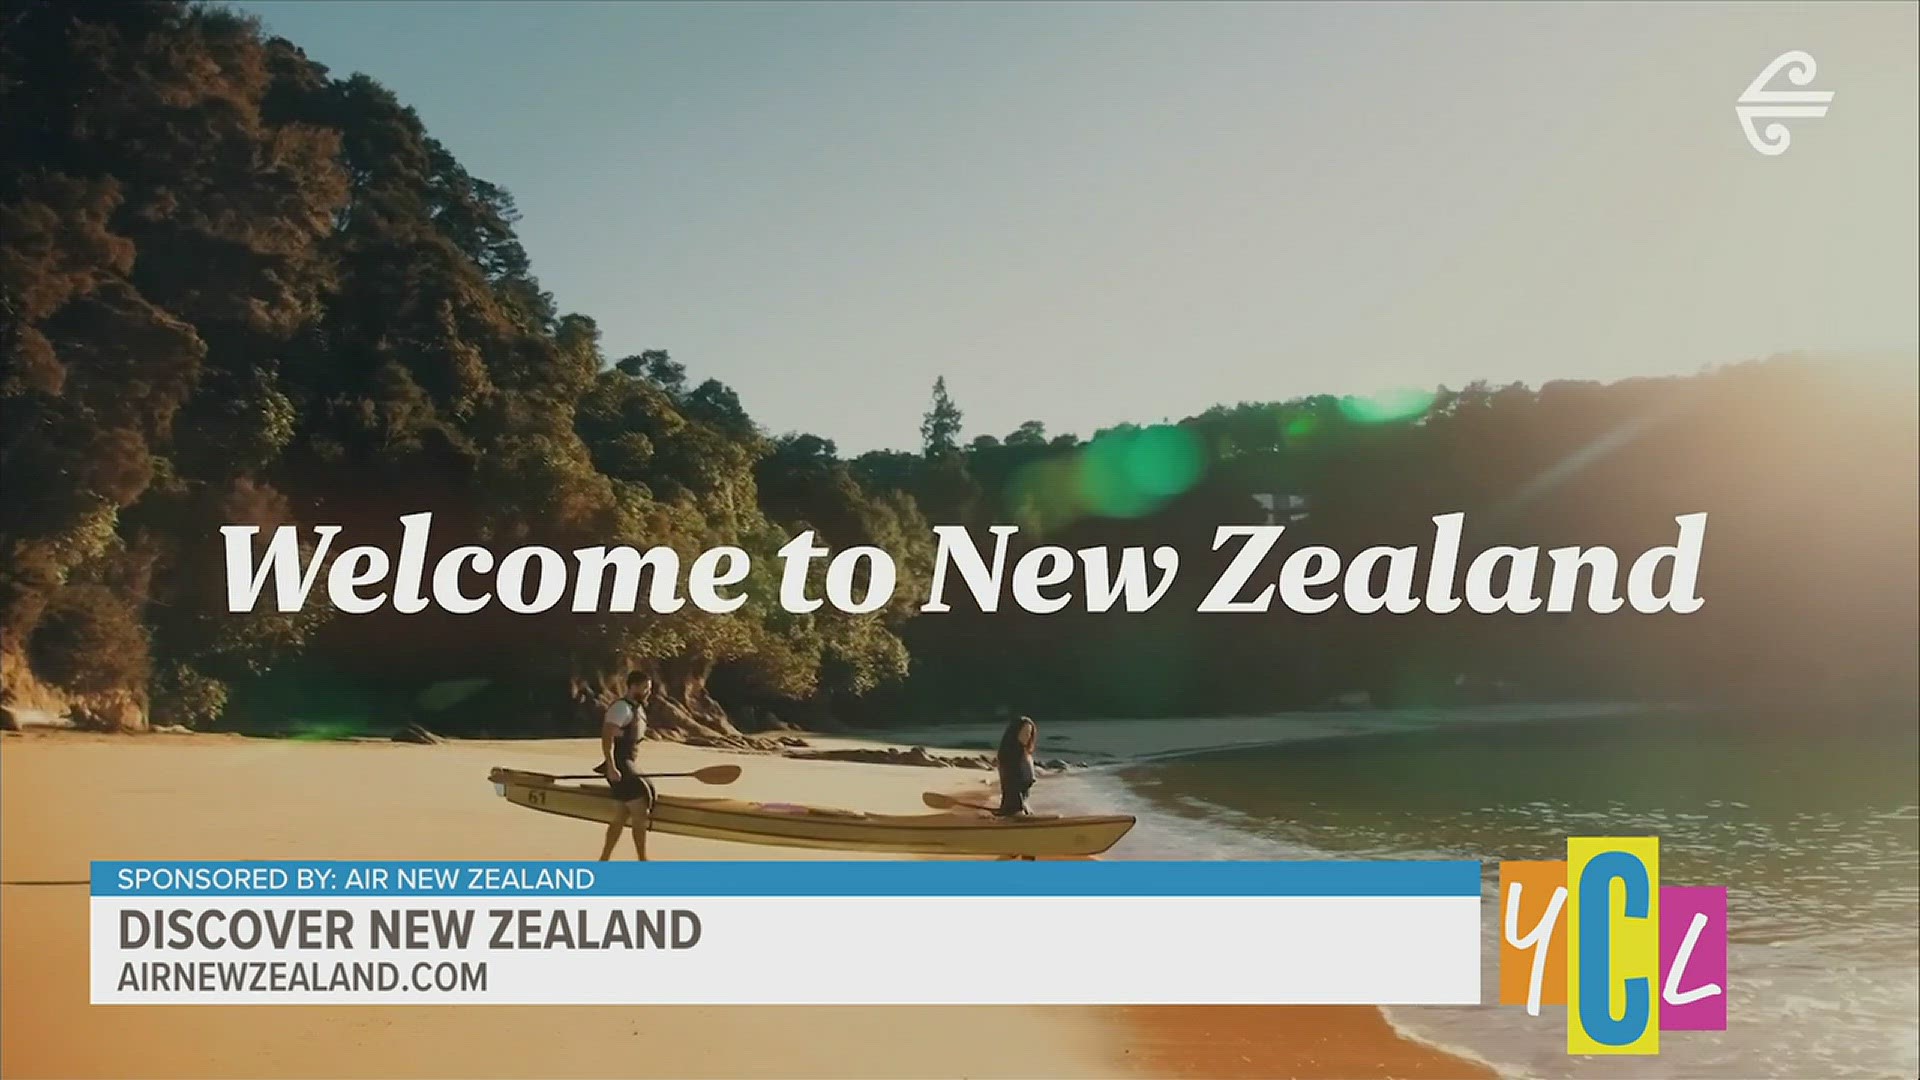 Discover New Zealand from hidden tracks, ancient forests and lakes to fresh kiwi cuisine and bustling city life. This segment is paid by Air New Zealand.